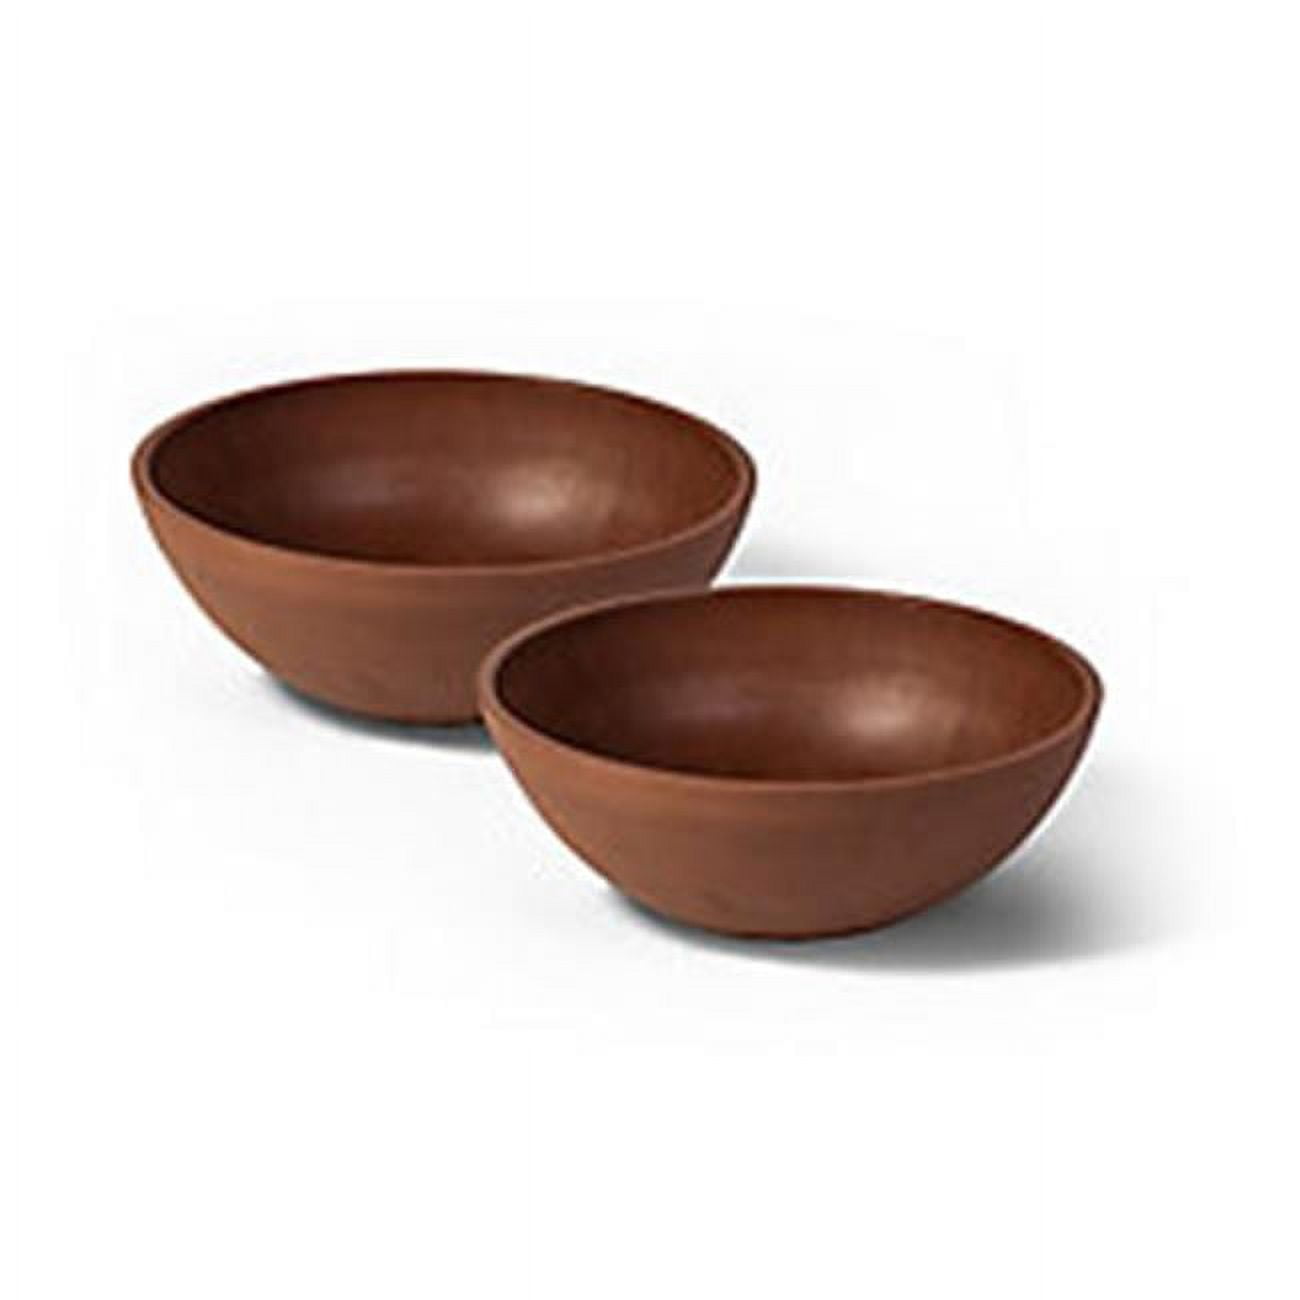 13732 4.5 X 12 X 12 In. Valencia Planter Bowl, Textured Terra Cotta - Pack Of 2